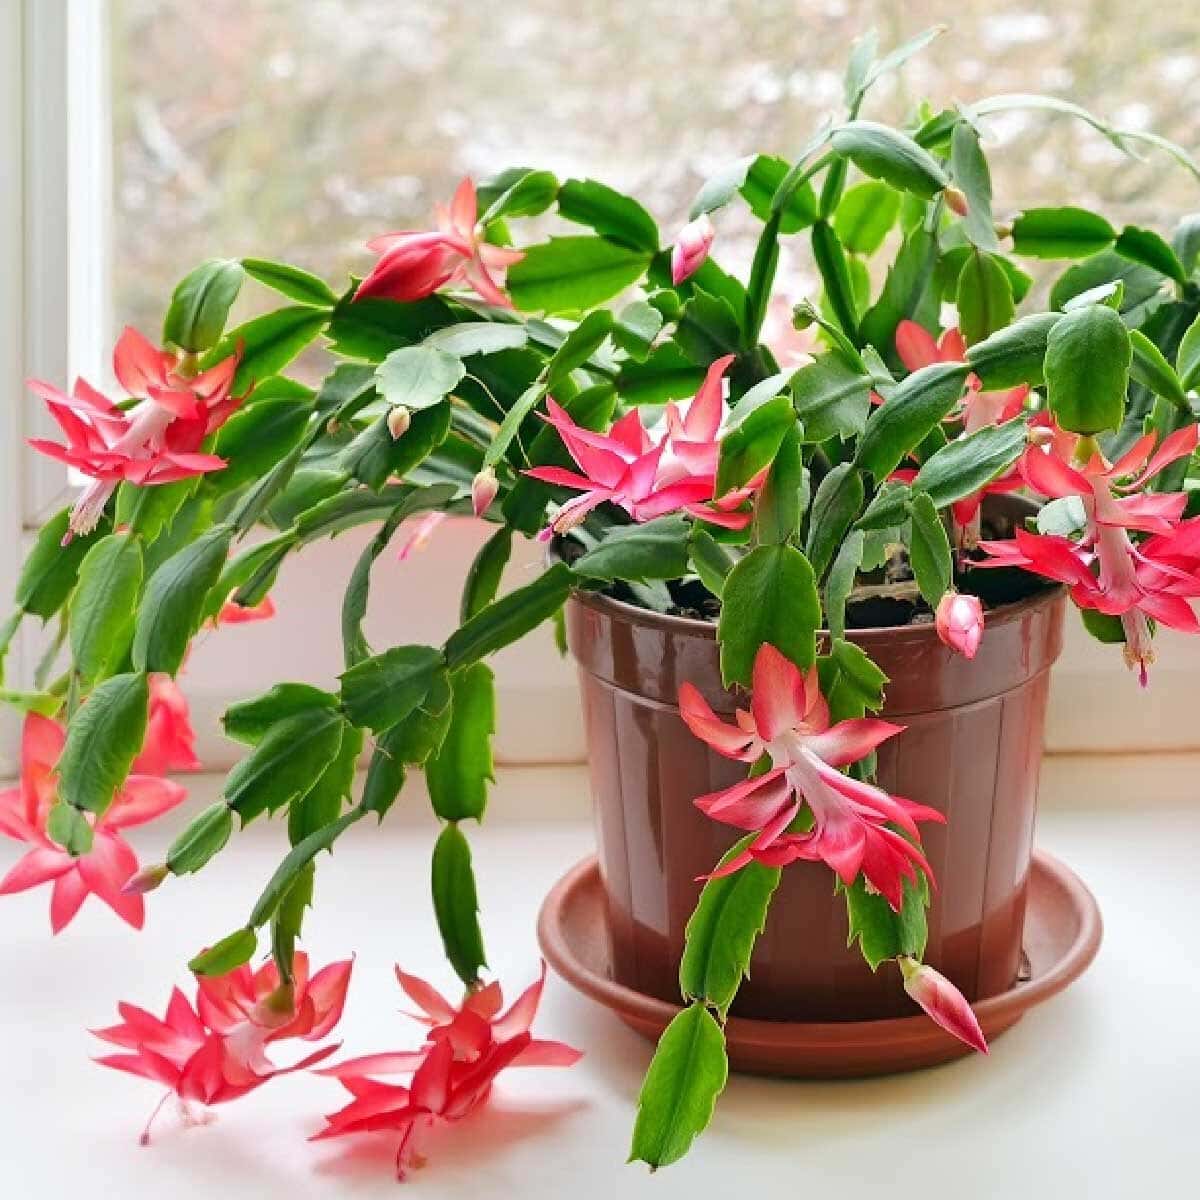 Guide to Learn to Take Care of your Christmas Cacti - Complete Gardering